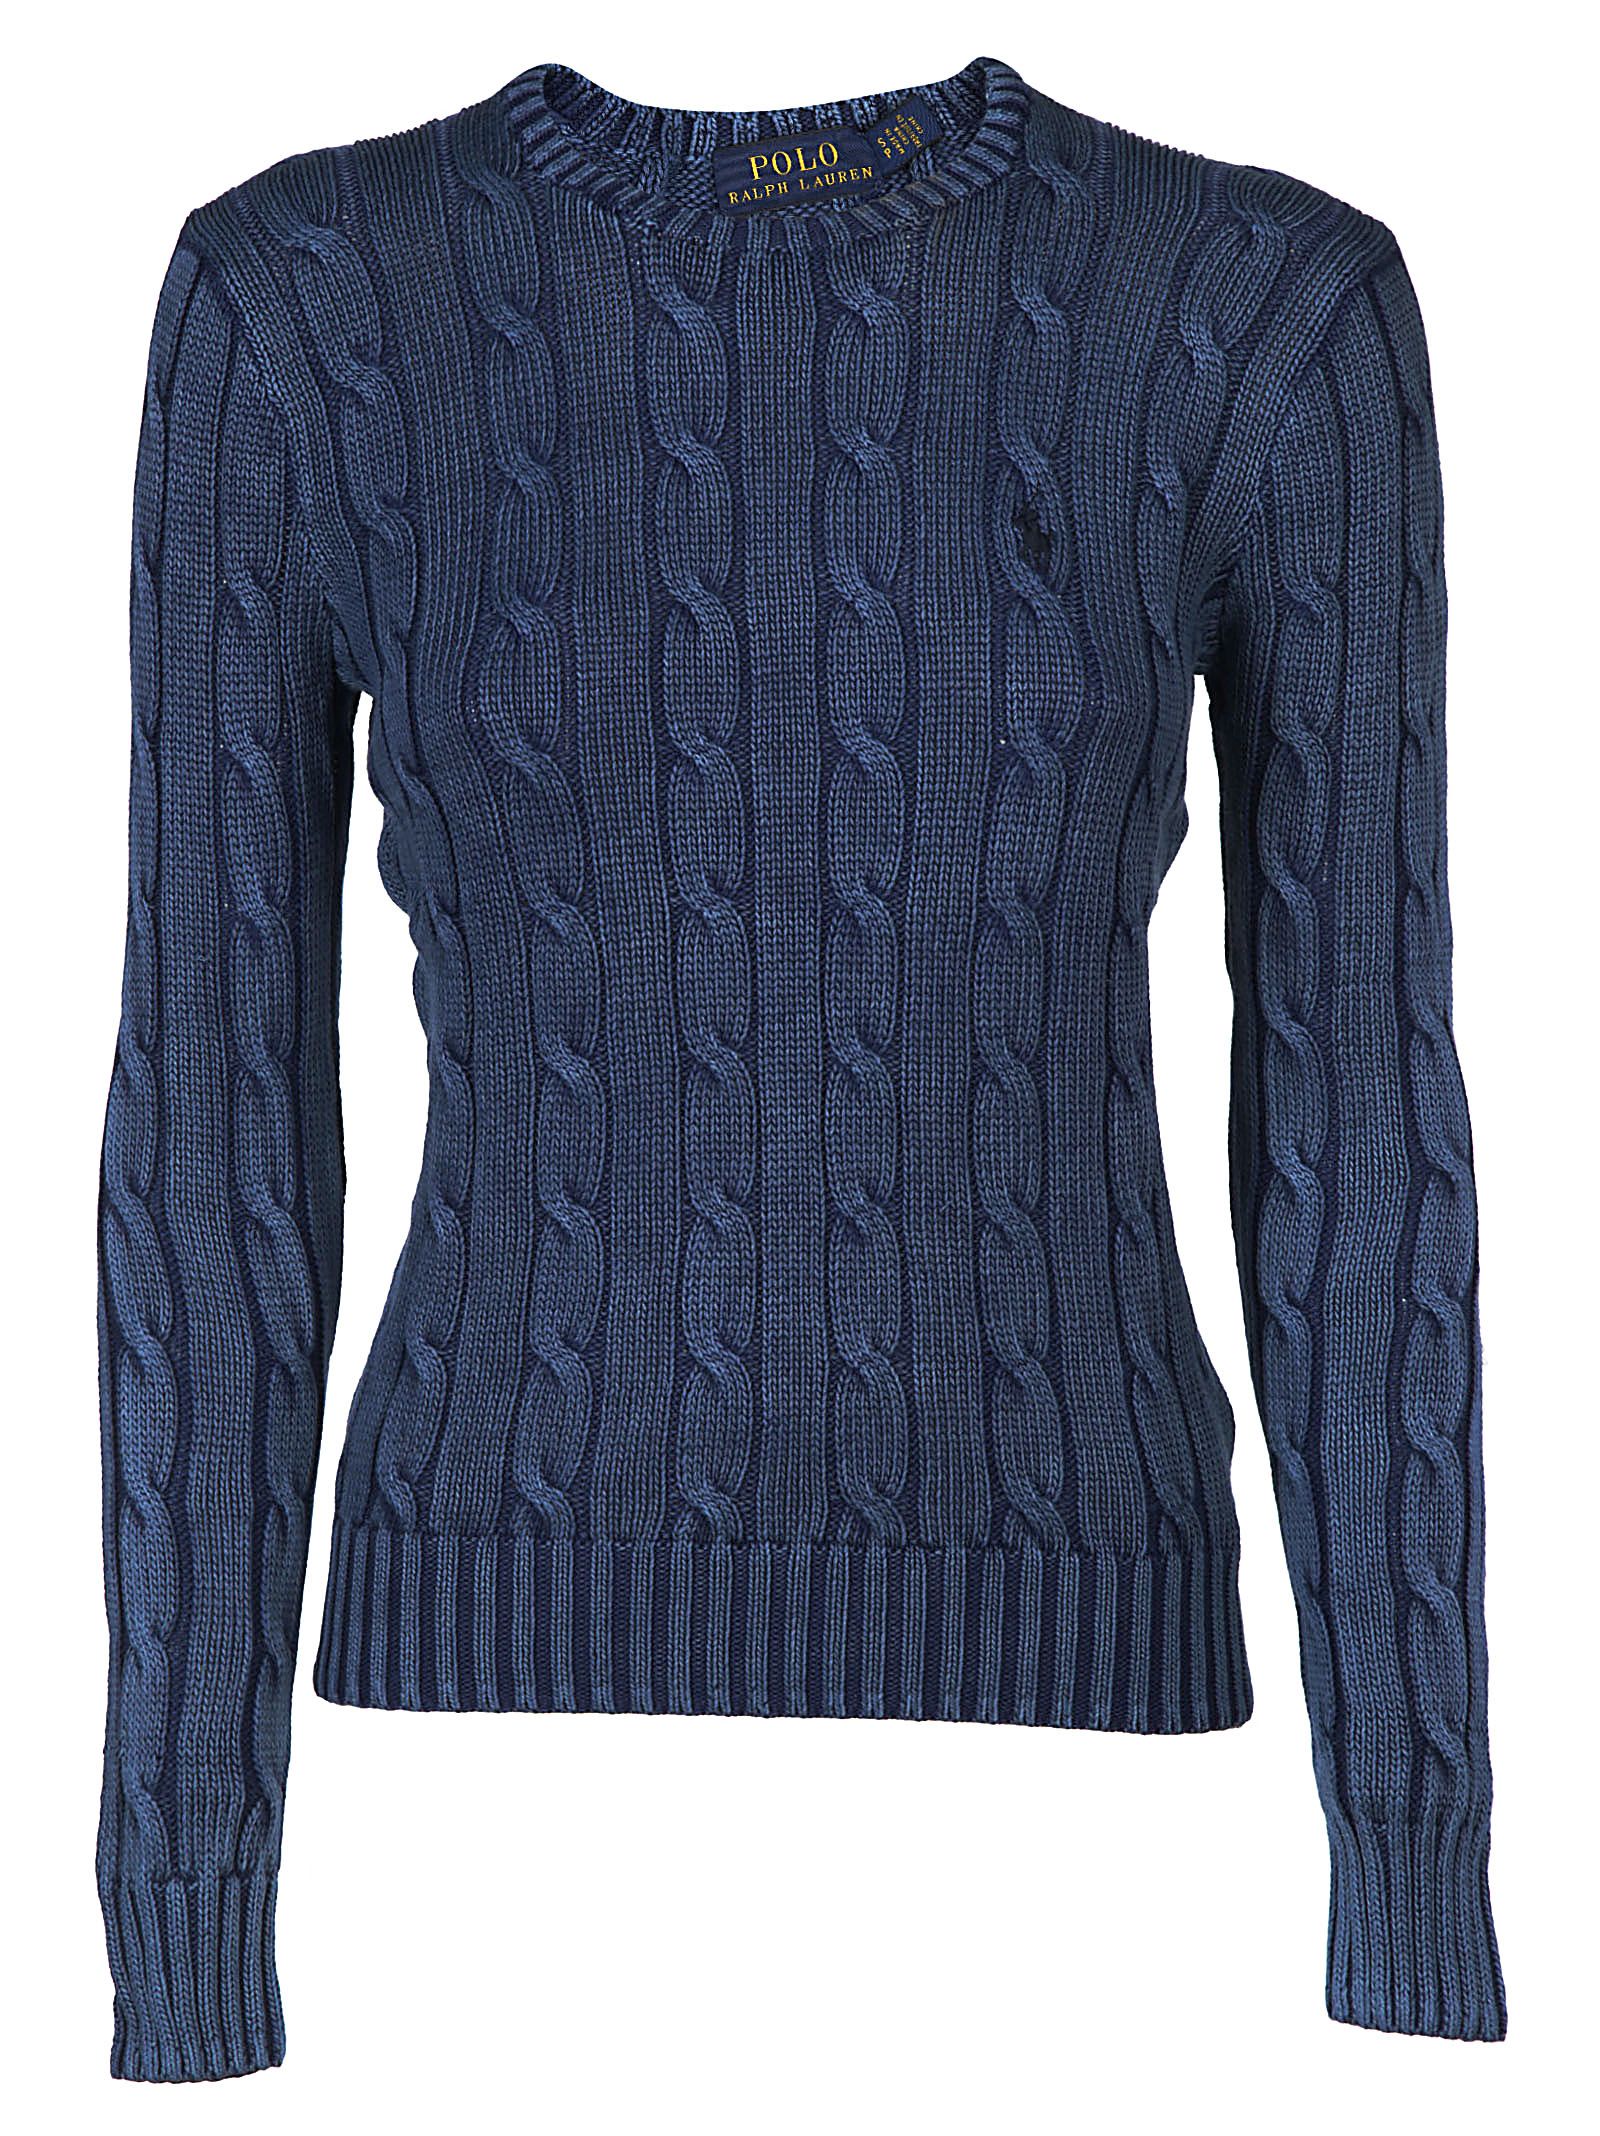 POLO RALPH LAUREN CABLE KNIT SWEATER,10588971